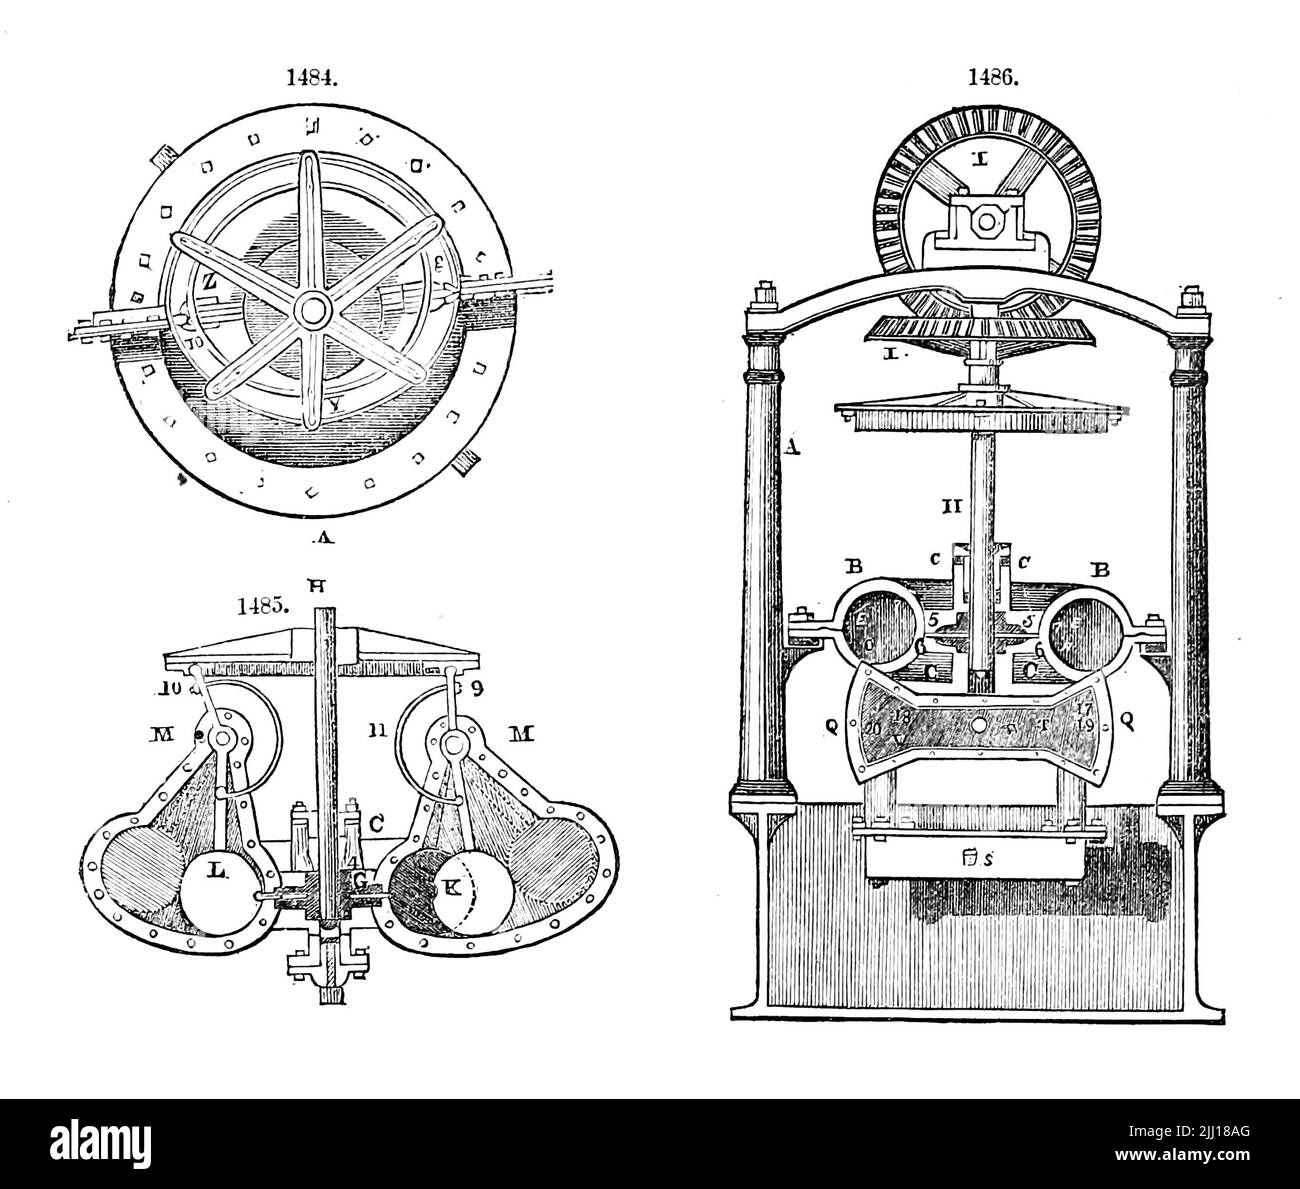 details and Varieties of Steam Engines from ' Appleton's dictionary of machines, mechanics, engine-work, and engineering ' by D. Appleton and Company Publication date 1874 Publisher New York,  D. Appleton, Stock Photo